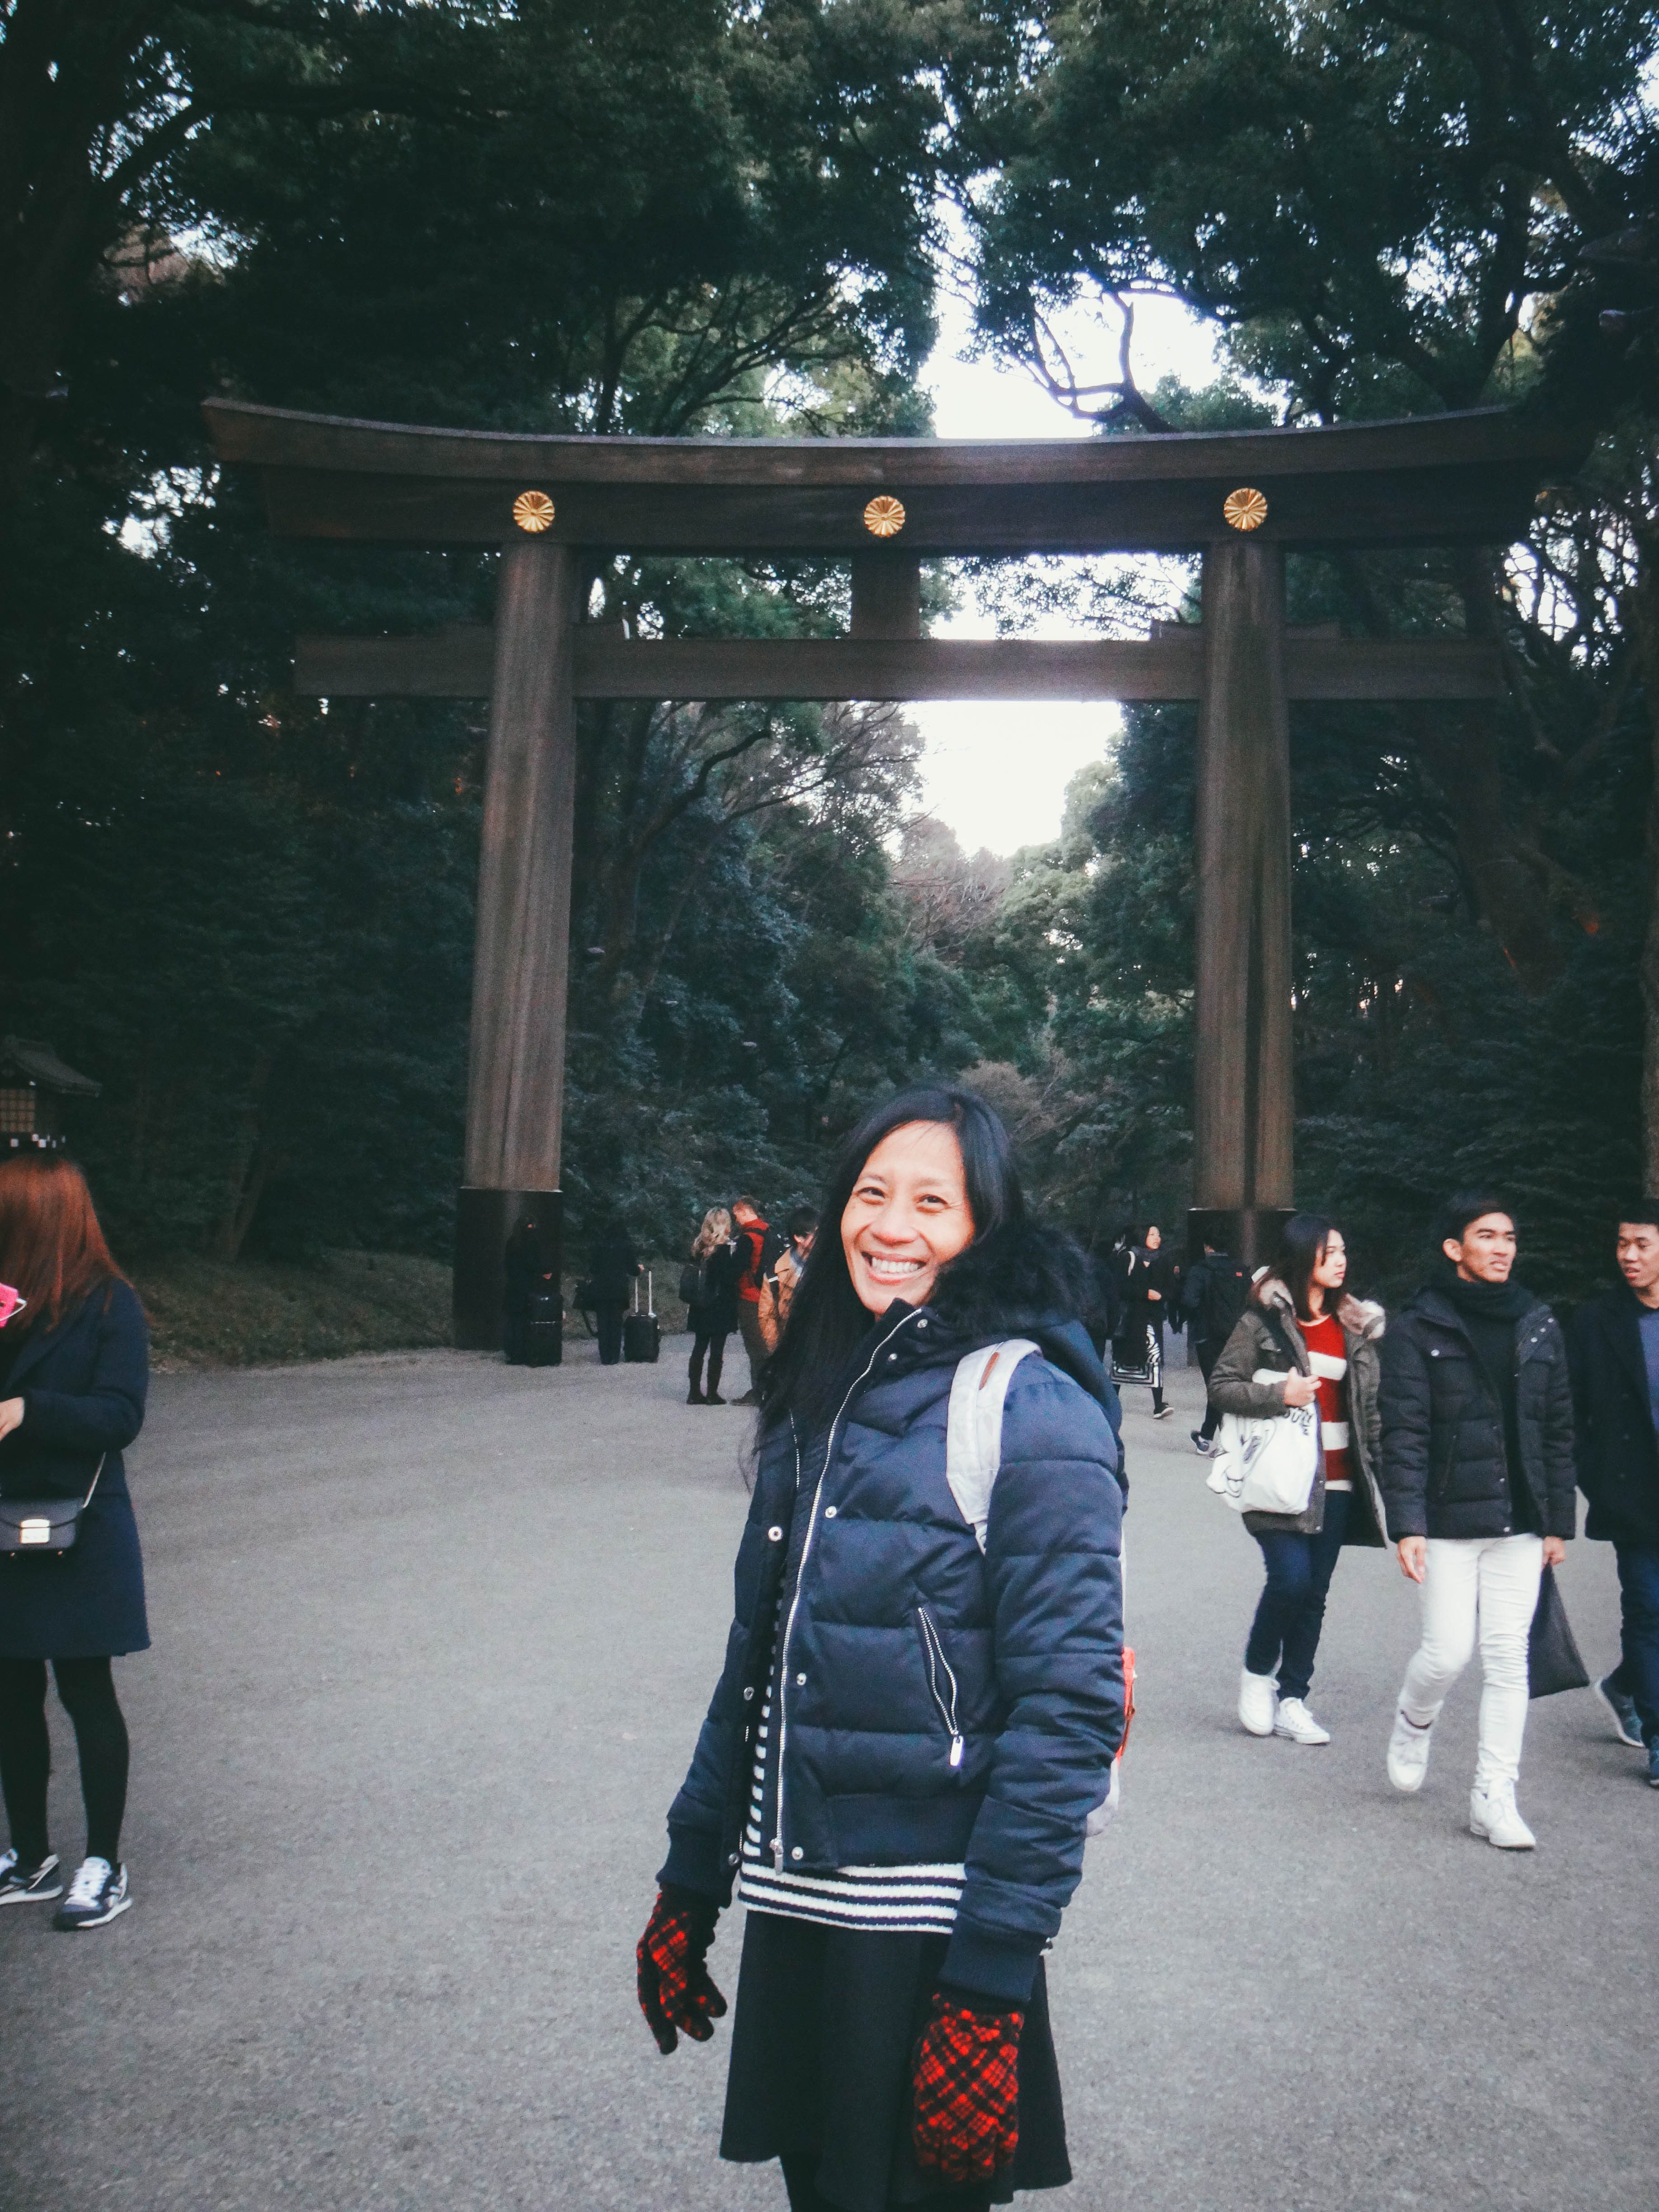 MEIJI SHRINE. The author's mother poses in front of the Meiji Shrine's torii gate, a fixture found in Shinto shrines. Photo provided by Irene Maligat  